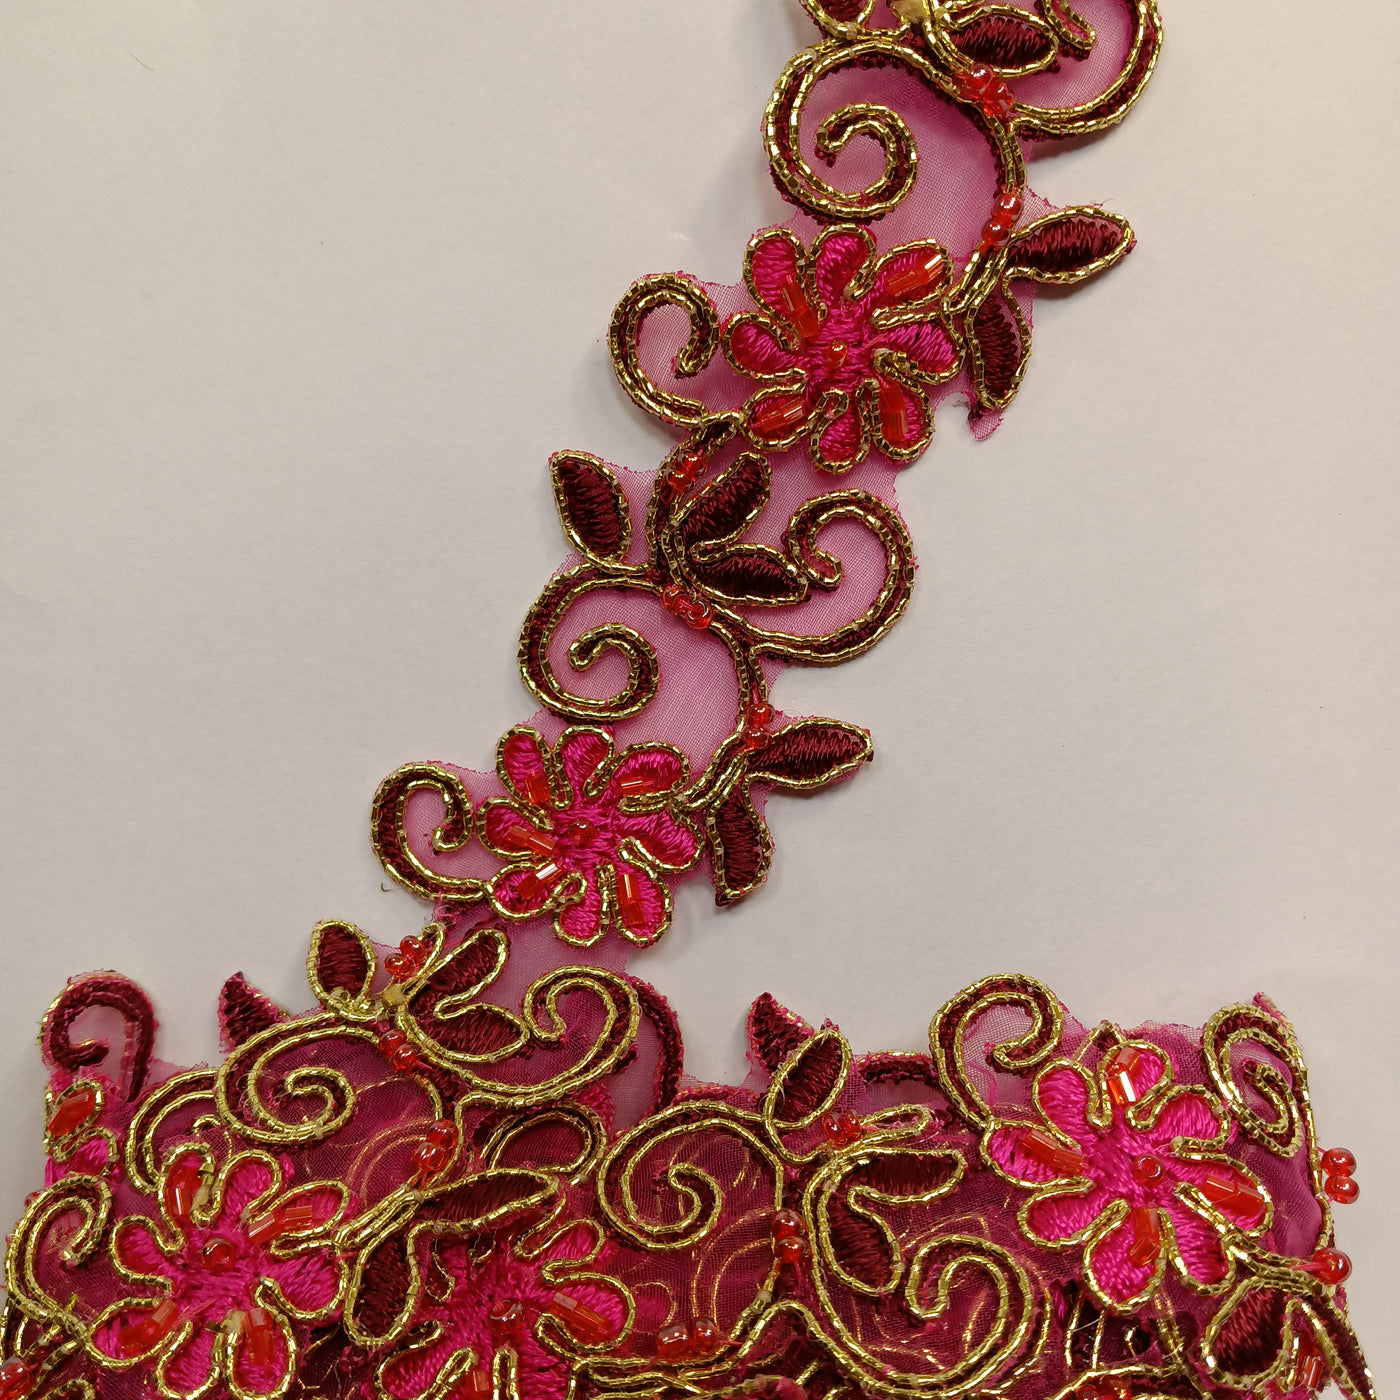 Beaded, Corded & Embroidered Fuchsia with Wine Trimming. Lace Usa